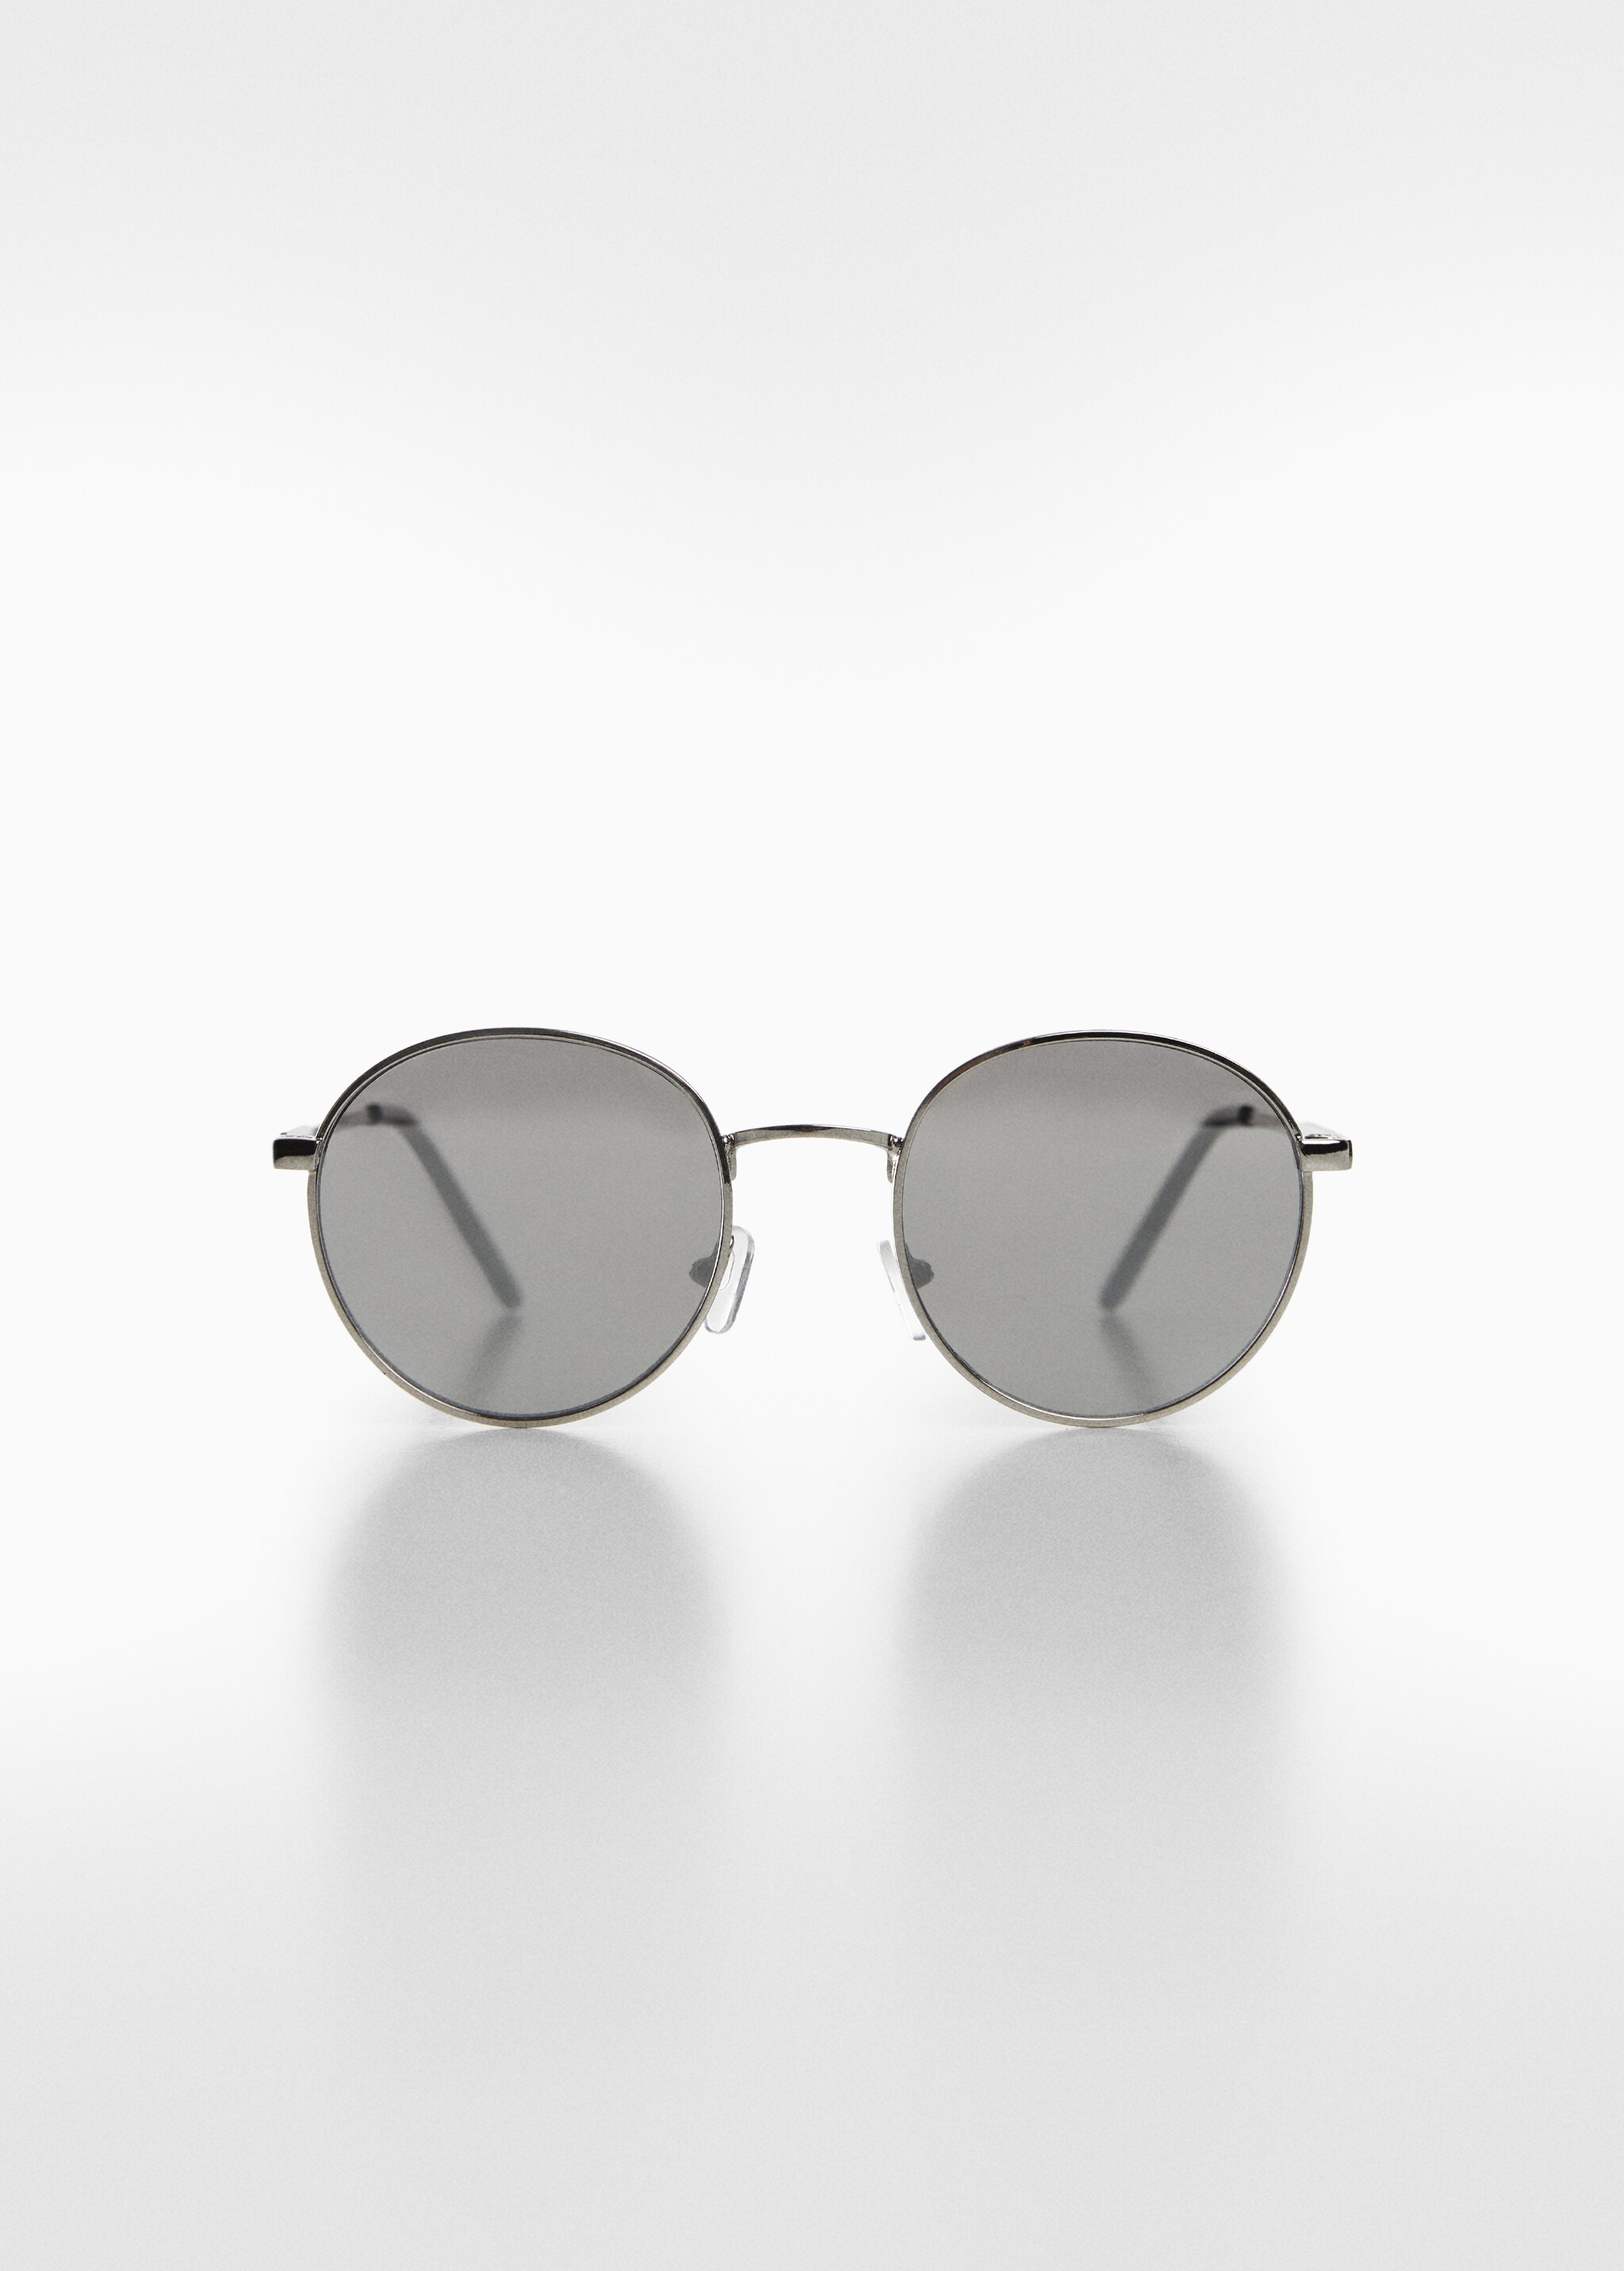 Round Metal Sunglasses - Article without model